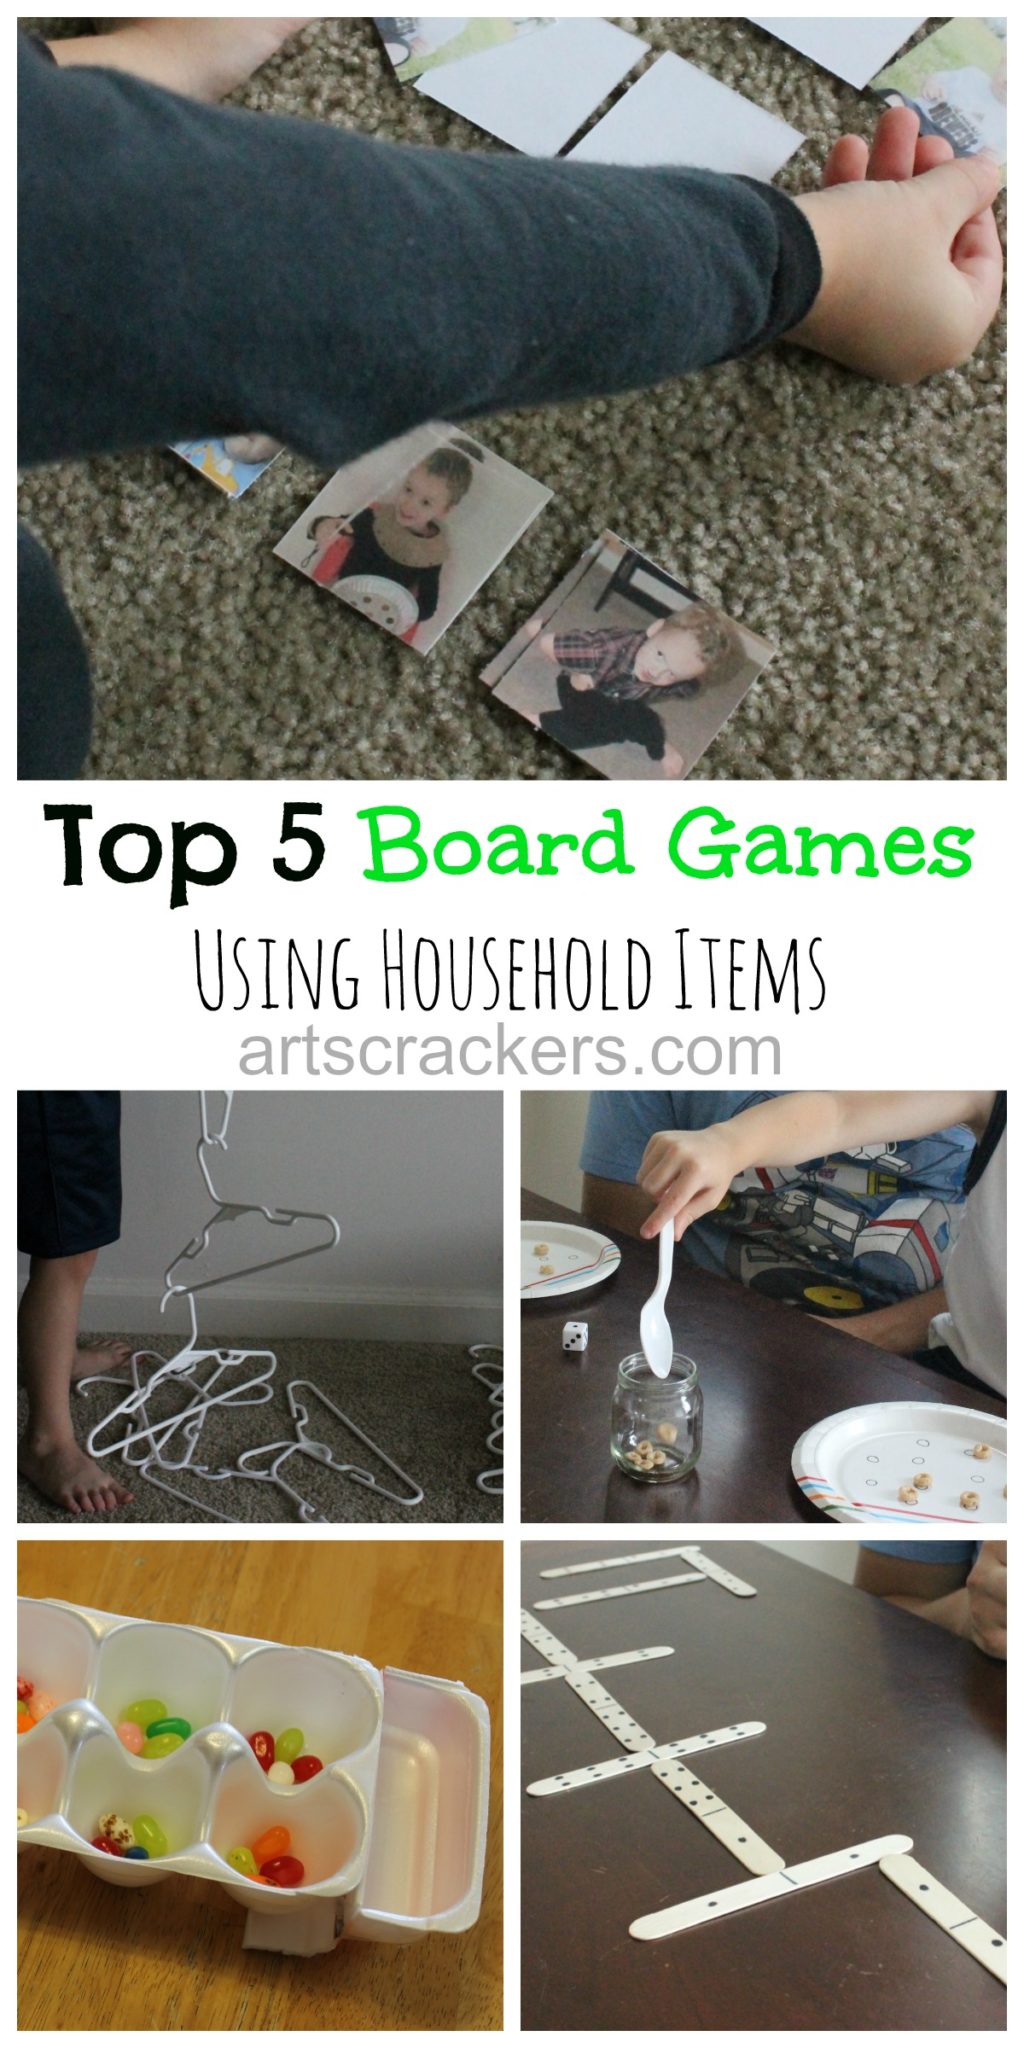 Top 5 Board Games Using Household Items